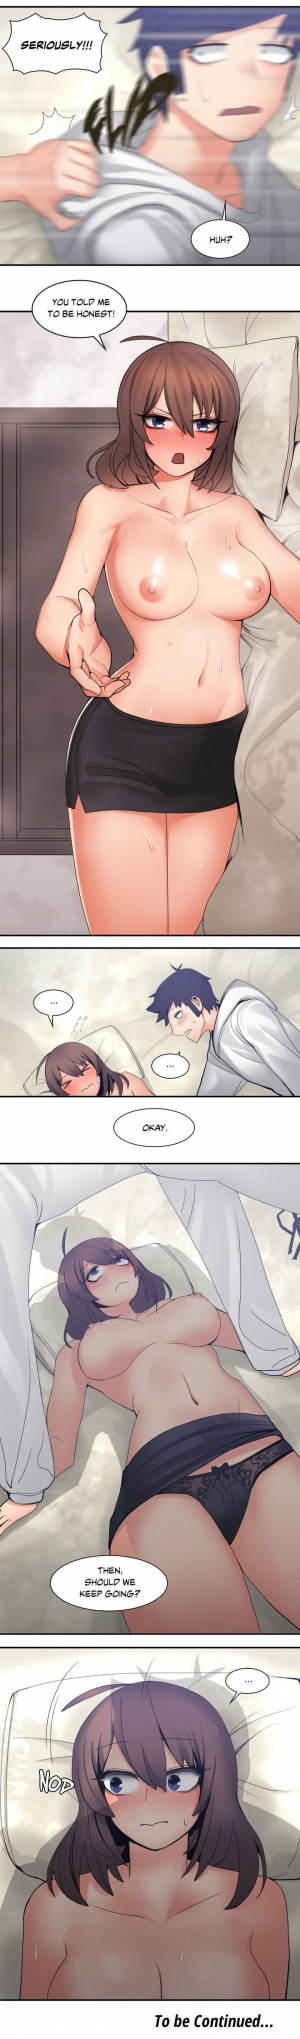 [Gaehoju, Gunnermul] The Girl That Got Stuck in the Wall Ch.11/11 [COMPLETED] [English] [Hentai Universe] - Page 129